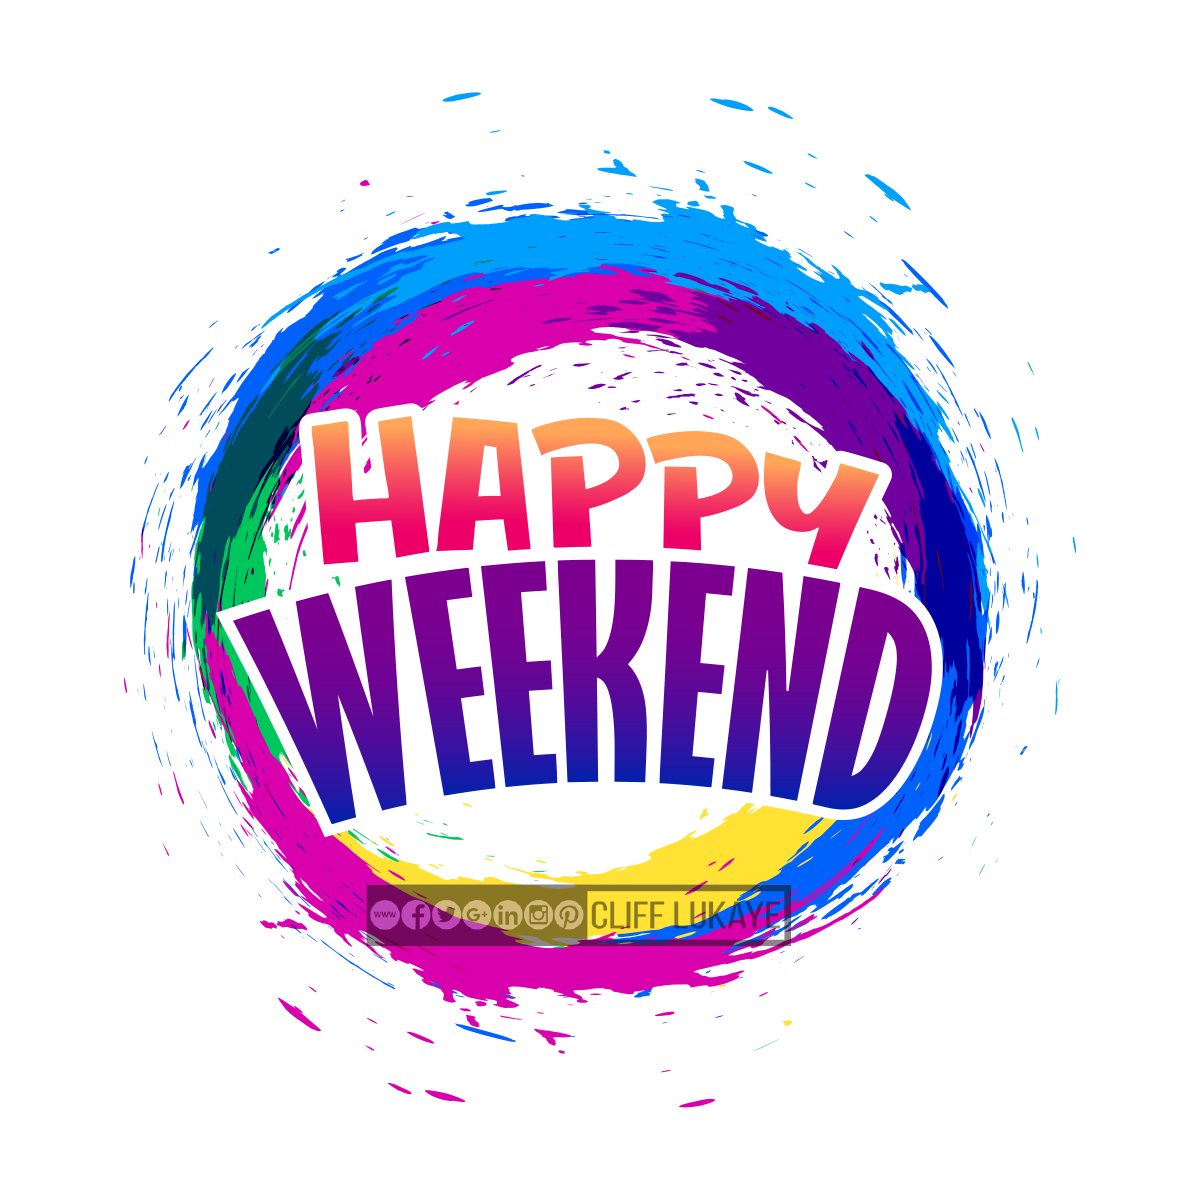 Happy #Weekend to you all! #FridayInspiration #WeekendVibes. Happy weekend image, Happy weekend, Weekend image